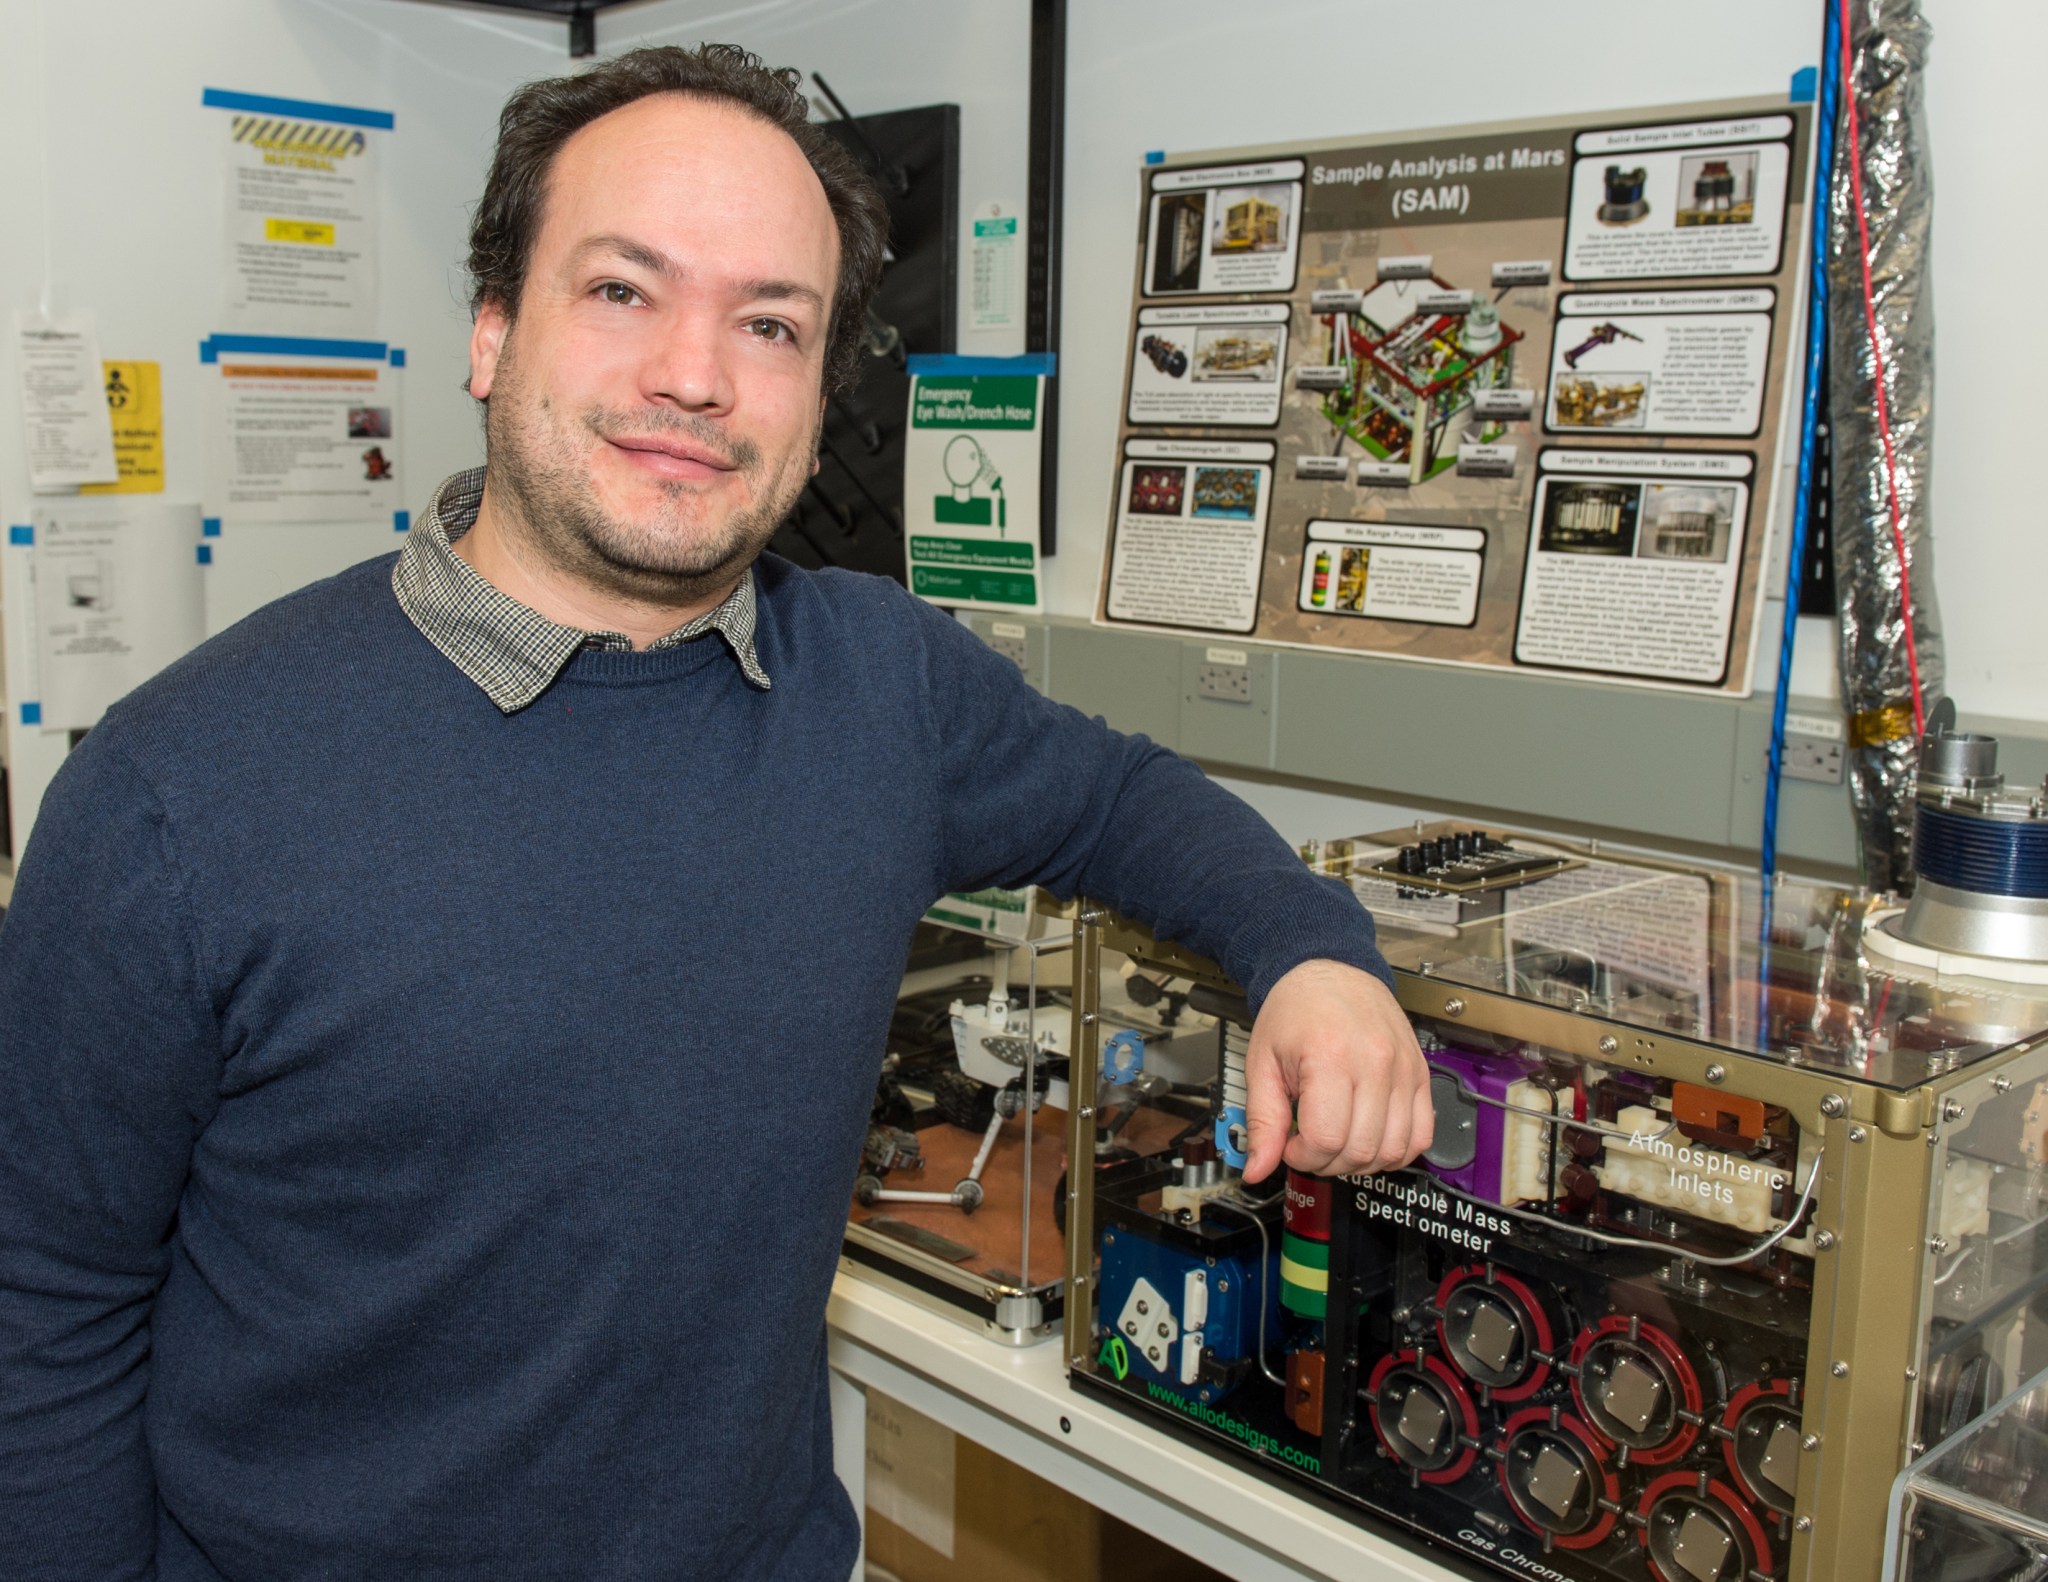 Man with dark brown hair wearing a blue sweater with a collared shirt underneath stands, smiling in front of a Sample Analysis at Mars poster 